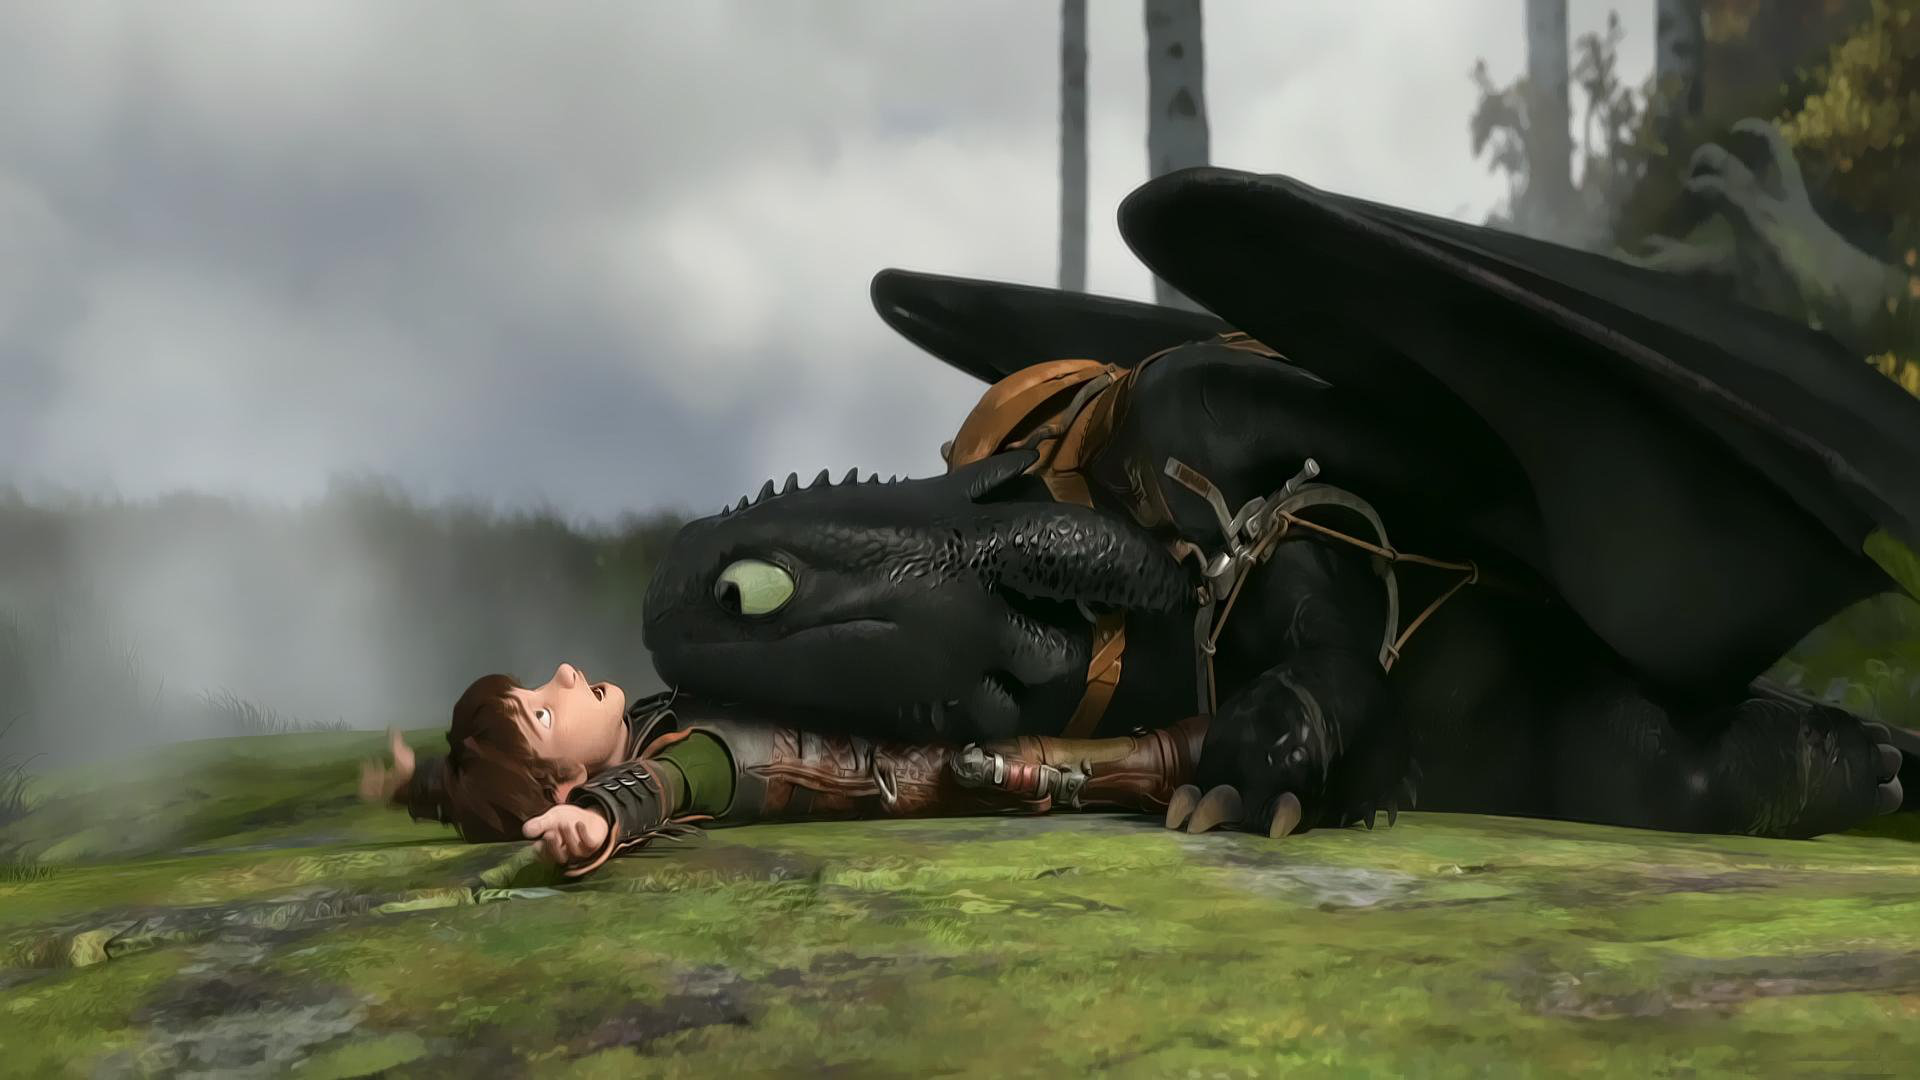 Best How To Train Your Dragon 2 wallpaper ID:90221 for High Resolution full hd 1920x1080 desktop